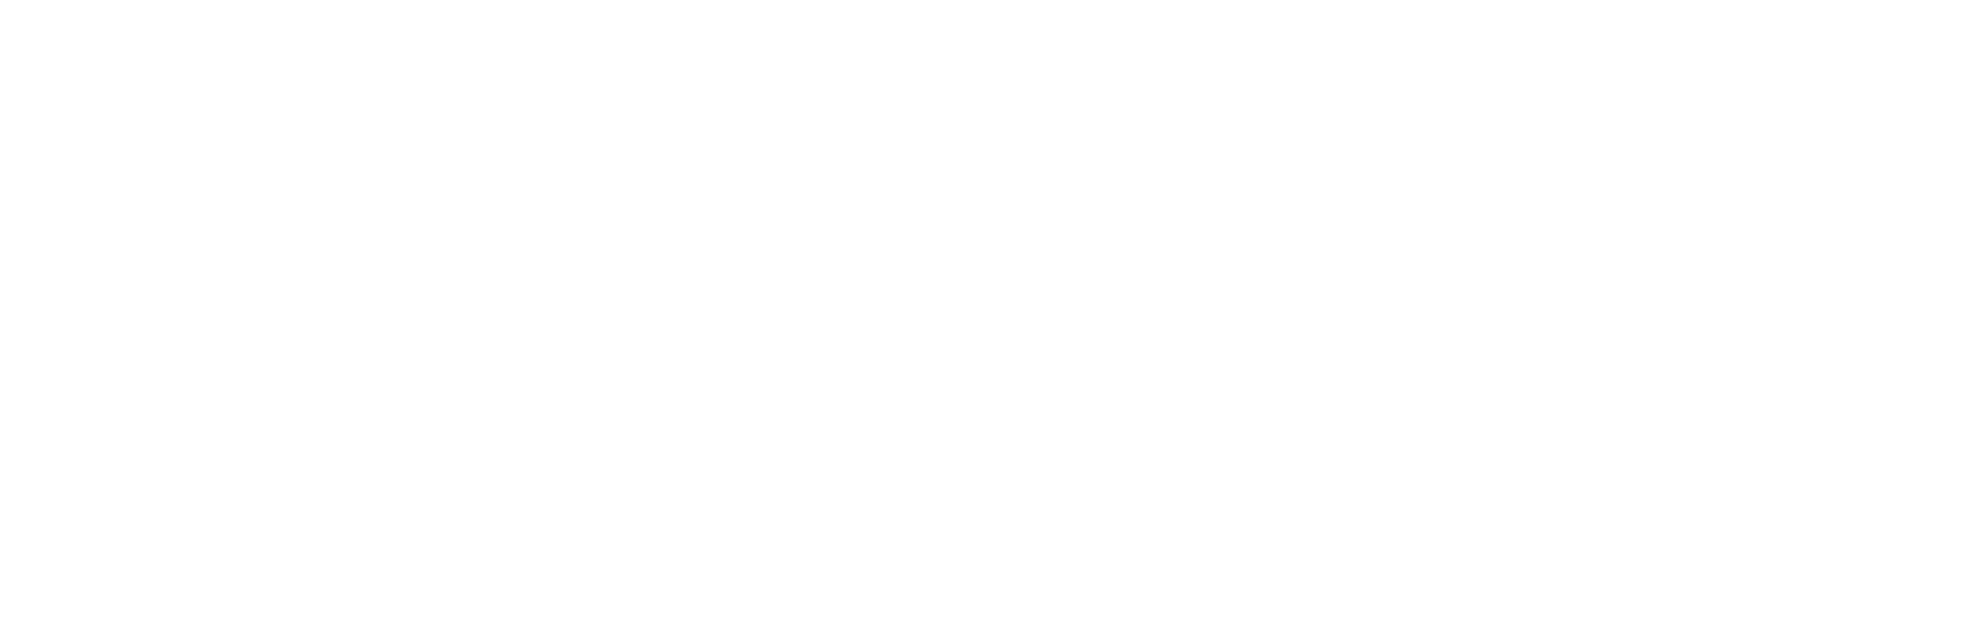 Ol' Betsy Luxury Pro Street caligraphy text